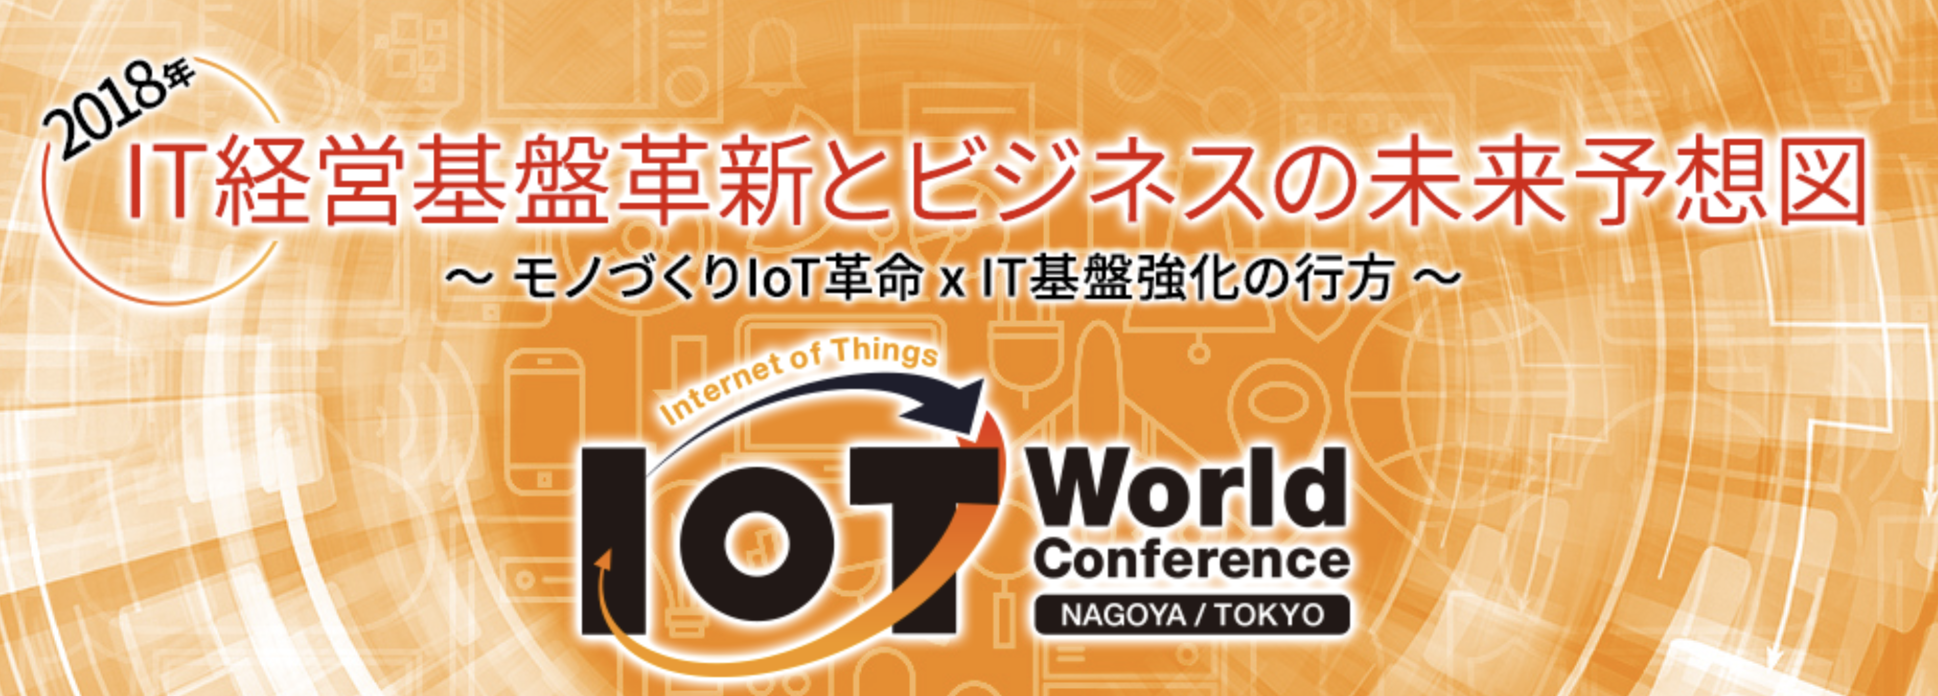 CEO Ishii, gave a lecture at IoT World Conference 2018